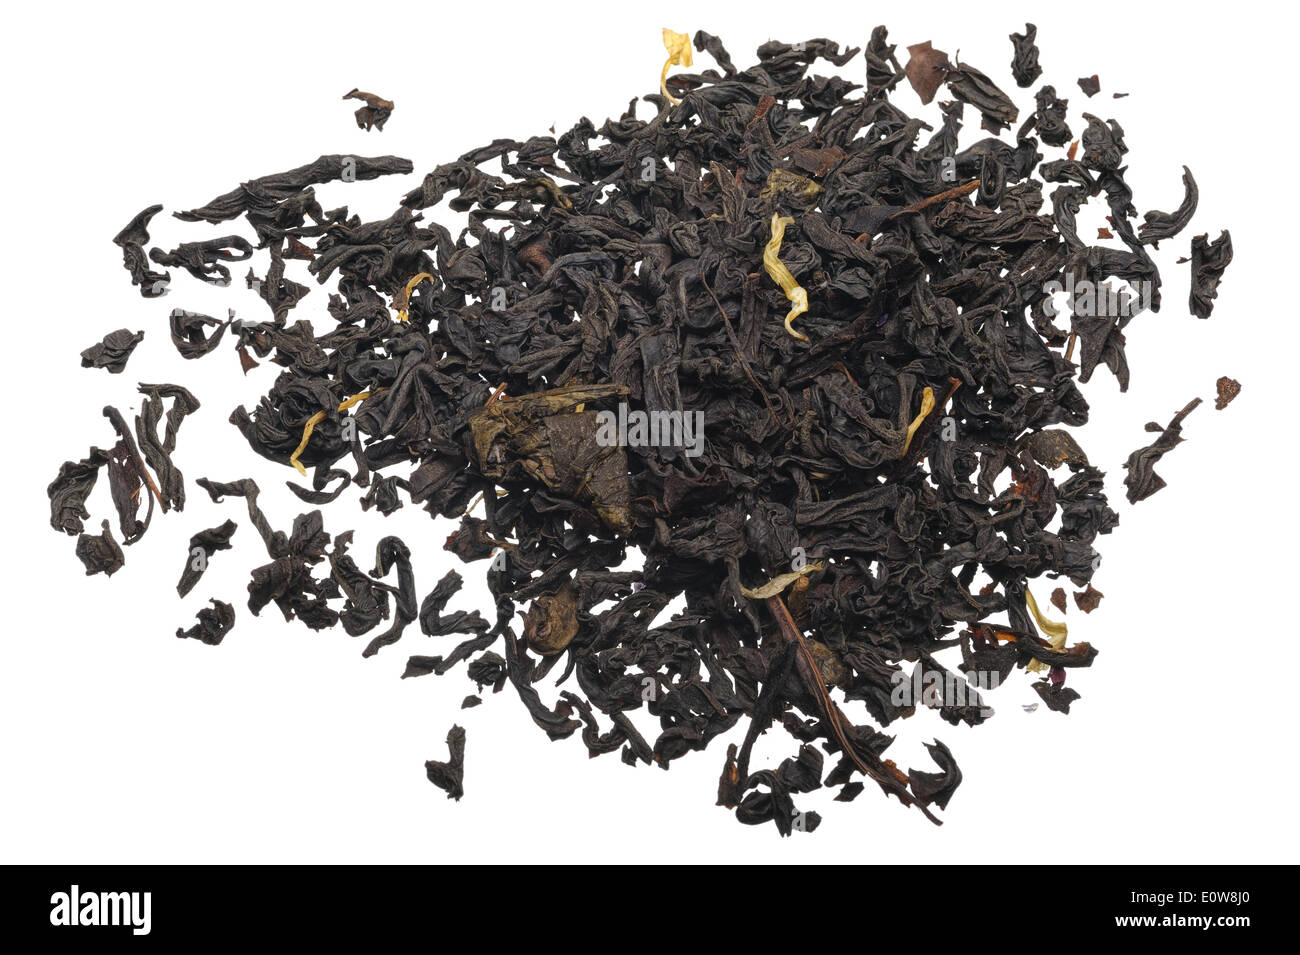 Black tea with flower petals and spices on a white background. Stock Photo